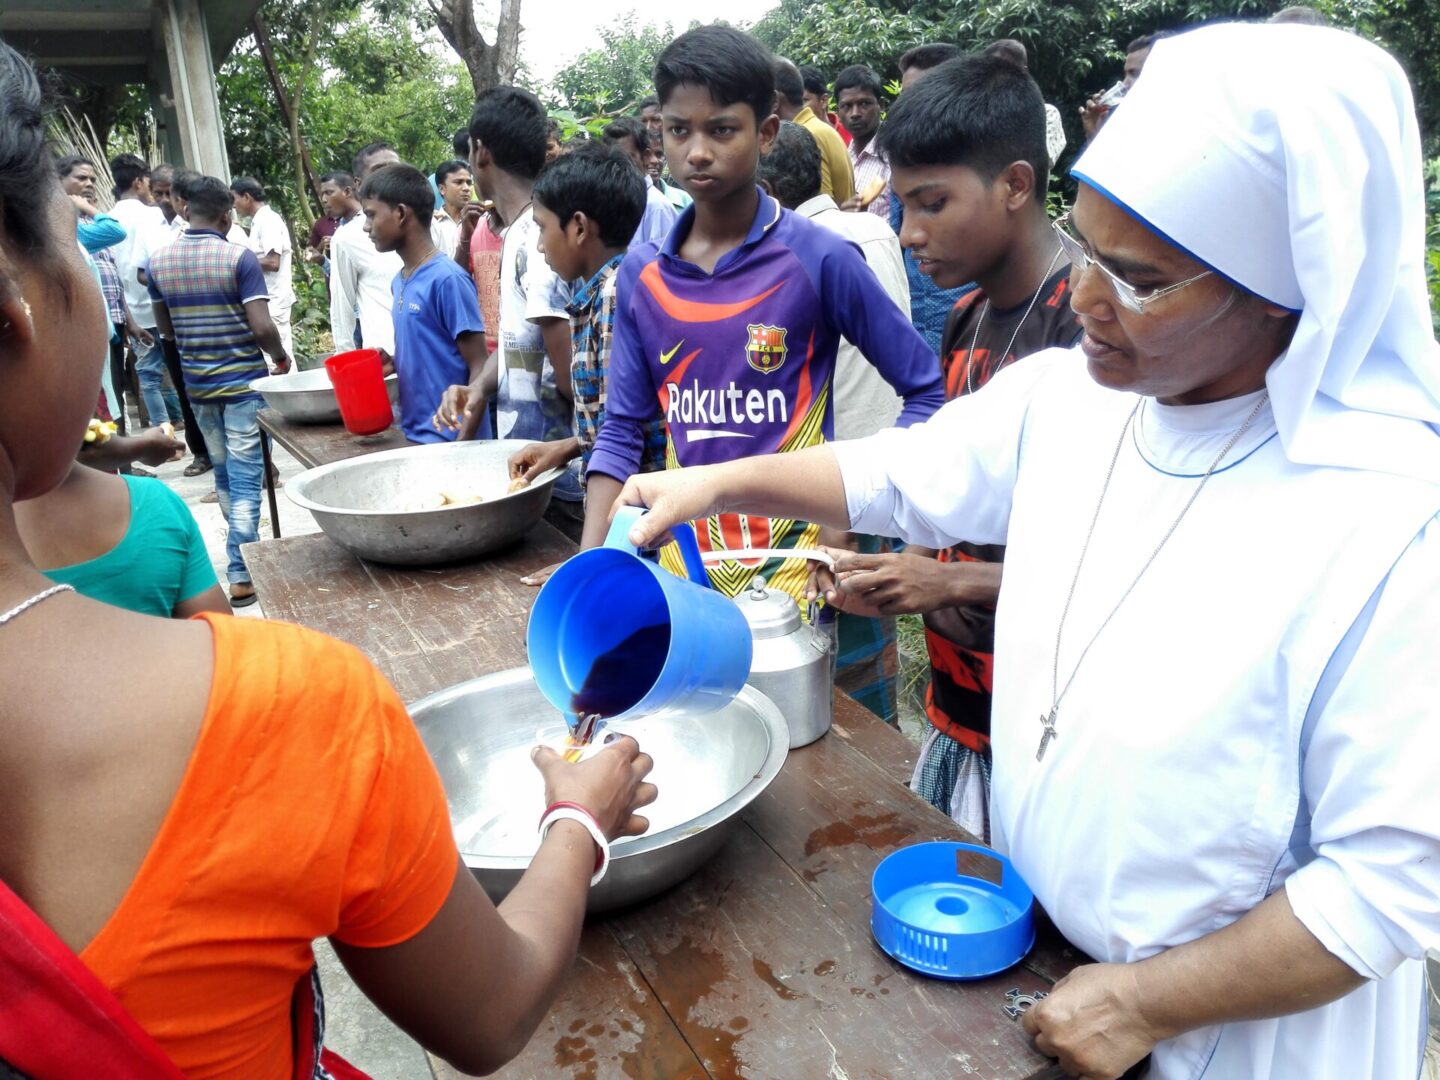 Image showing kind gesture, feeding the hungry.